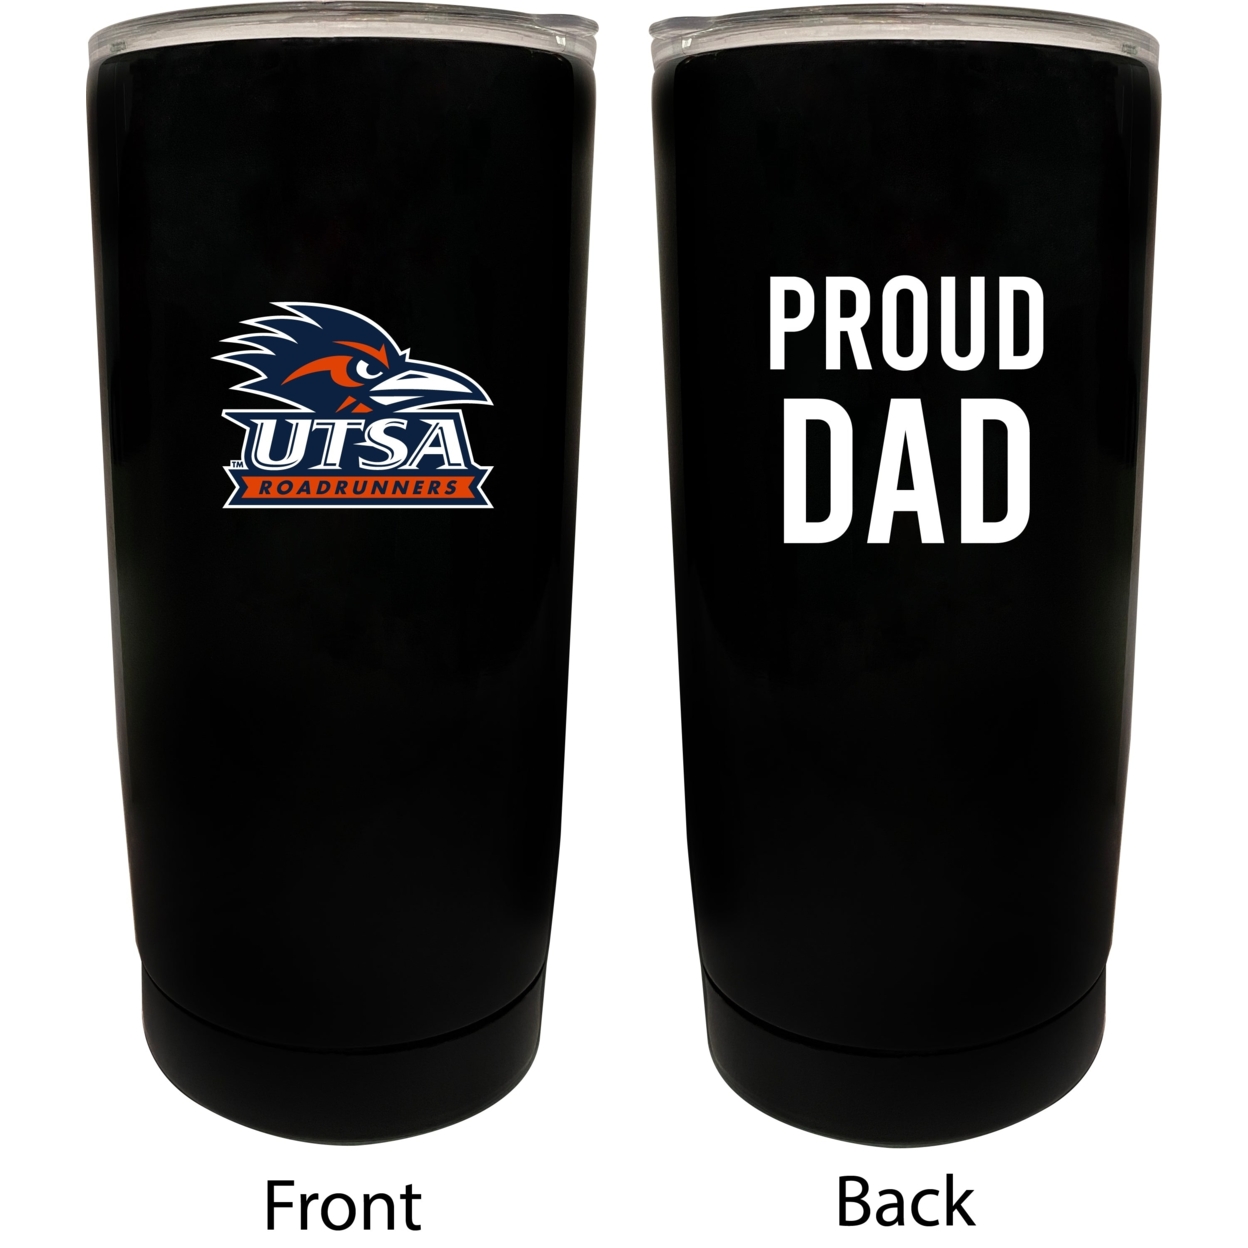 UTSA Road Runners Proud Dad 16 Oz Insulated Stainless Steel Tumblers